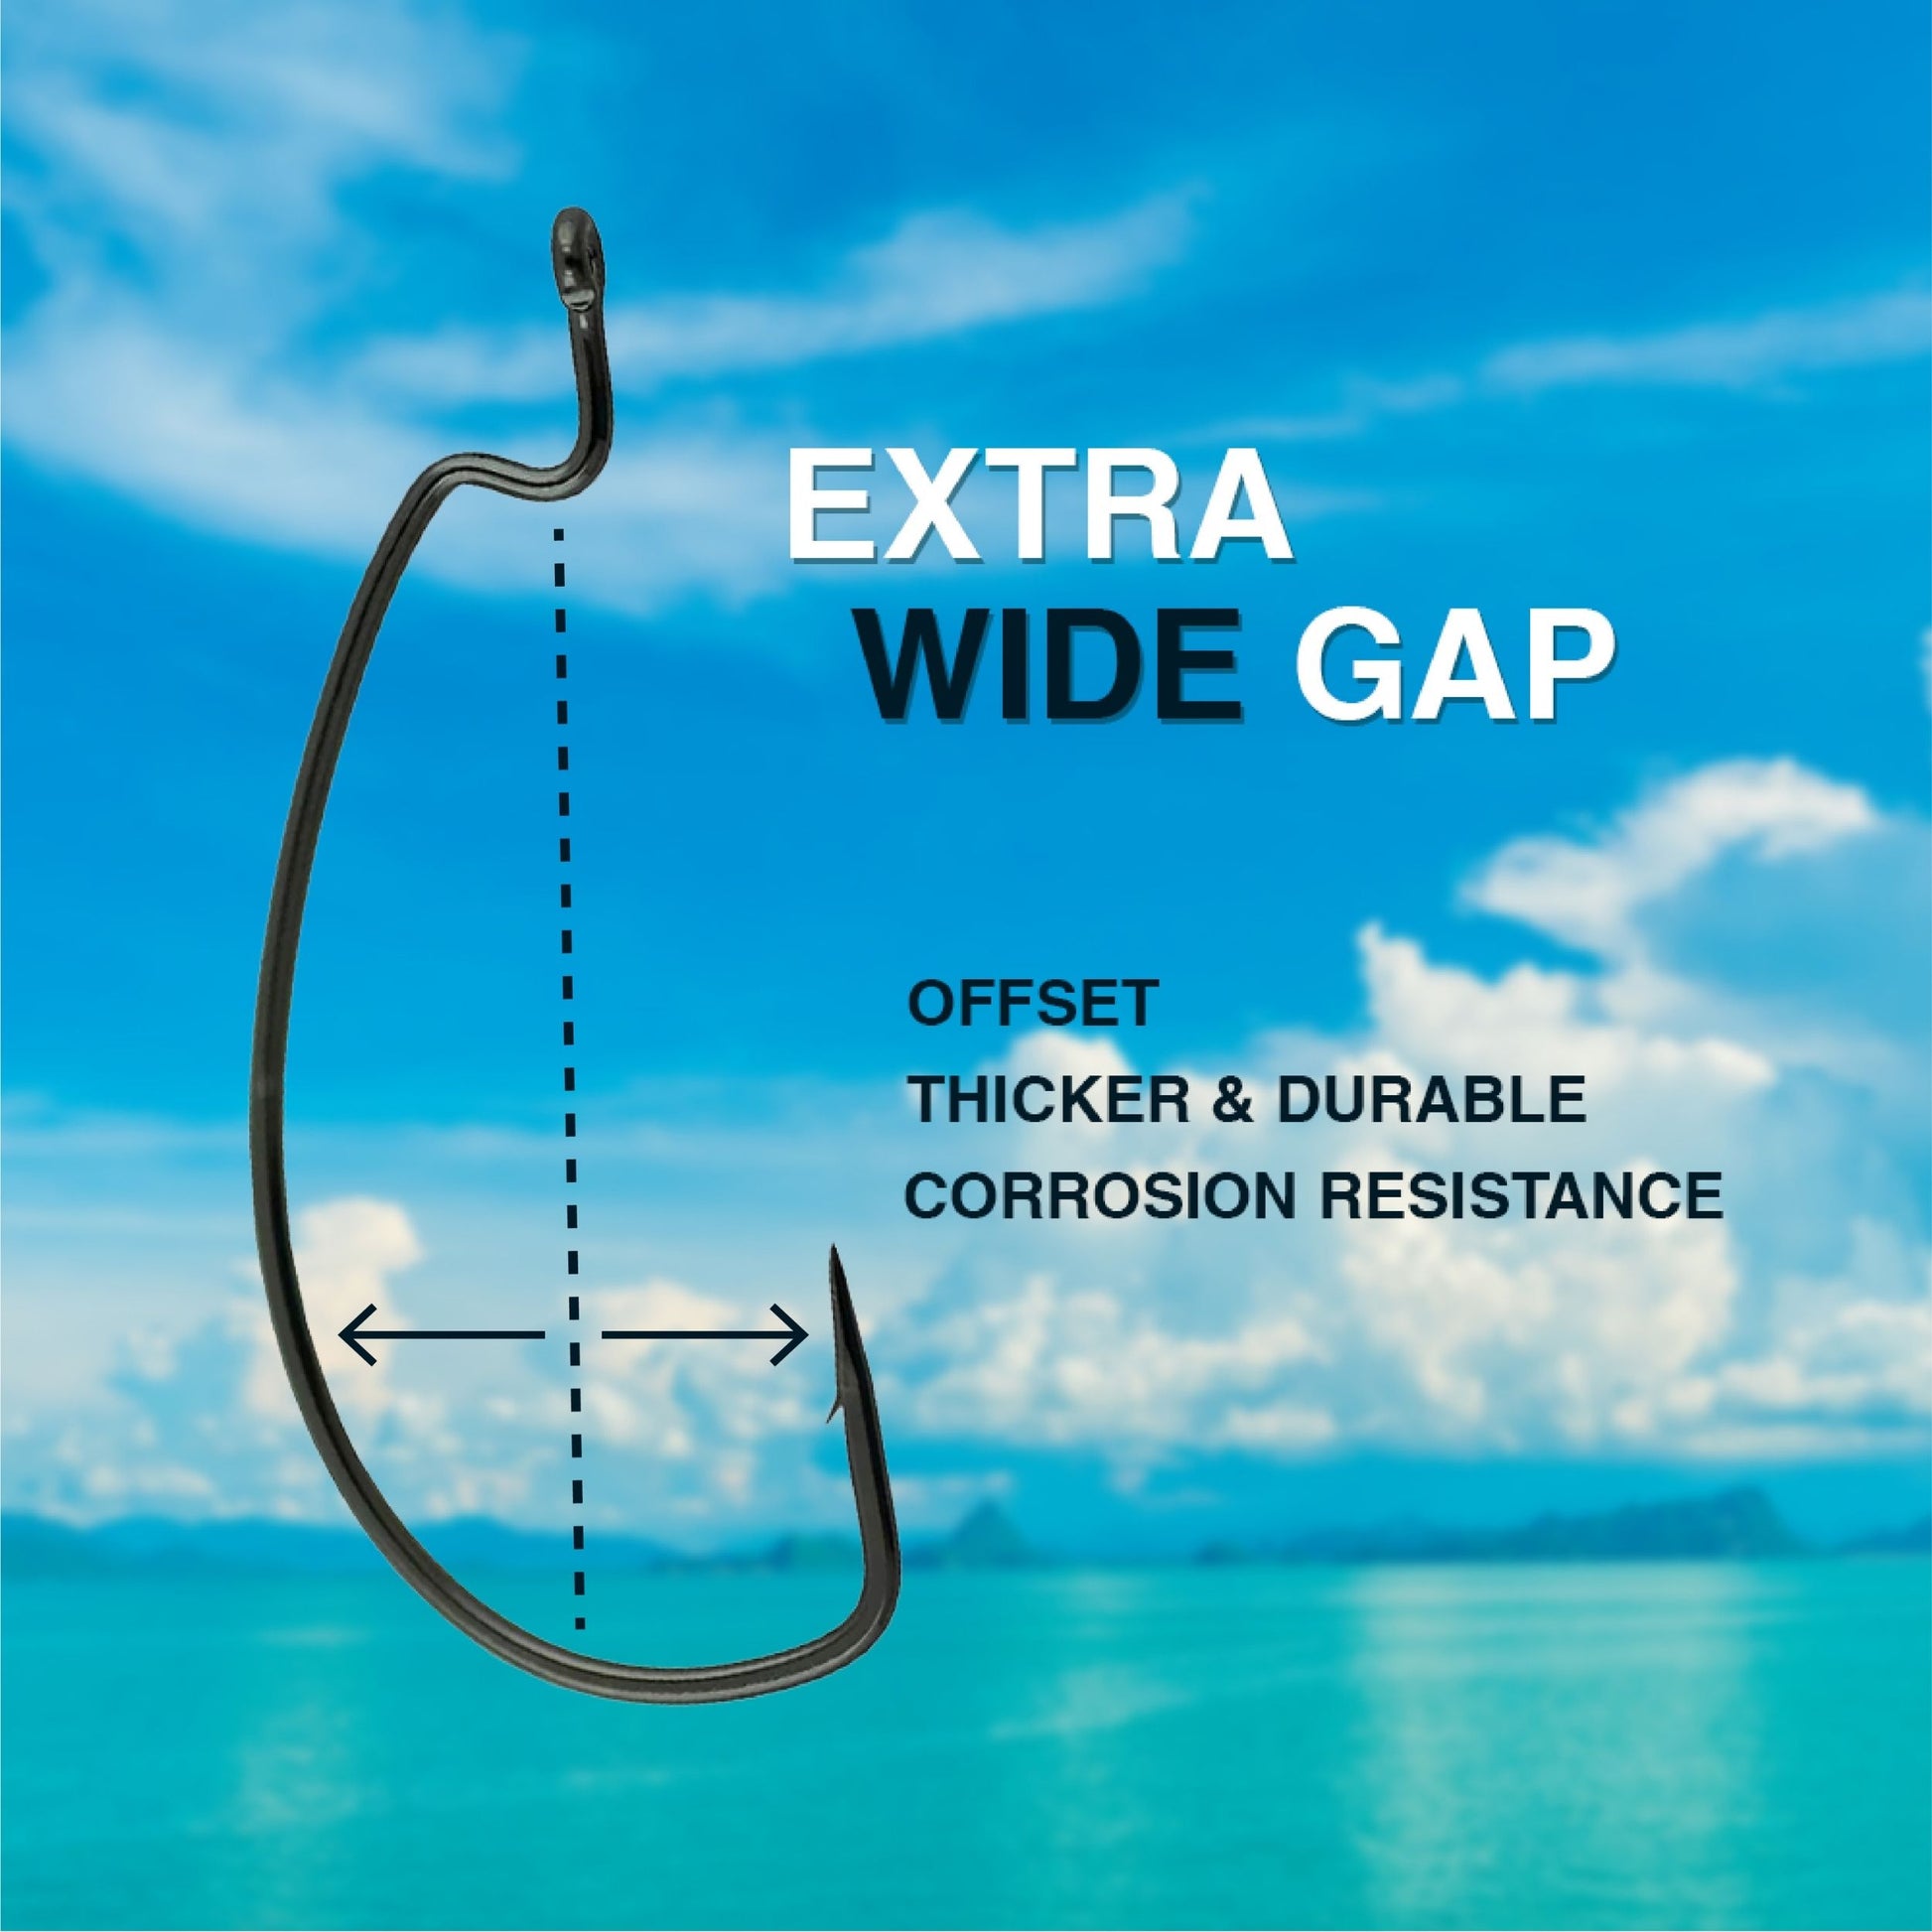 Ewg Offset Shank Worm Hook 25 Count Per Pack Freshwater Saltwater Fishing  Hooks High Carbon Steel Extra Strength Size #1#1/0#2/0#3/0#4/0#5/0 - China  Fishing Tackle and Fishing Hook price